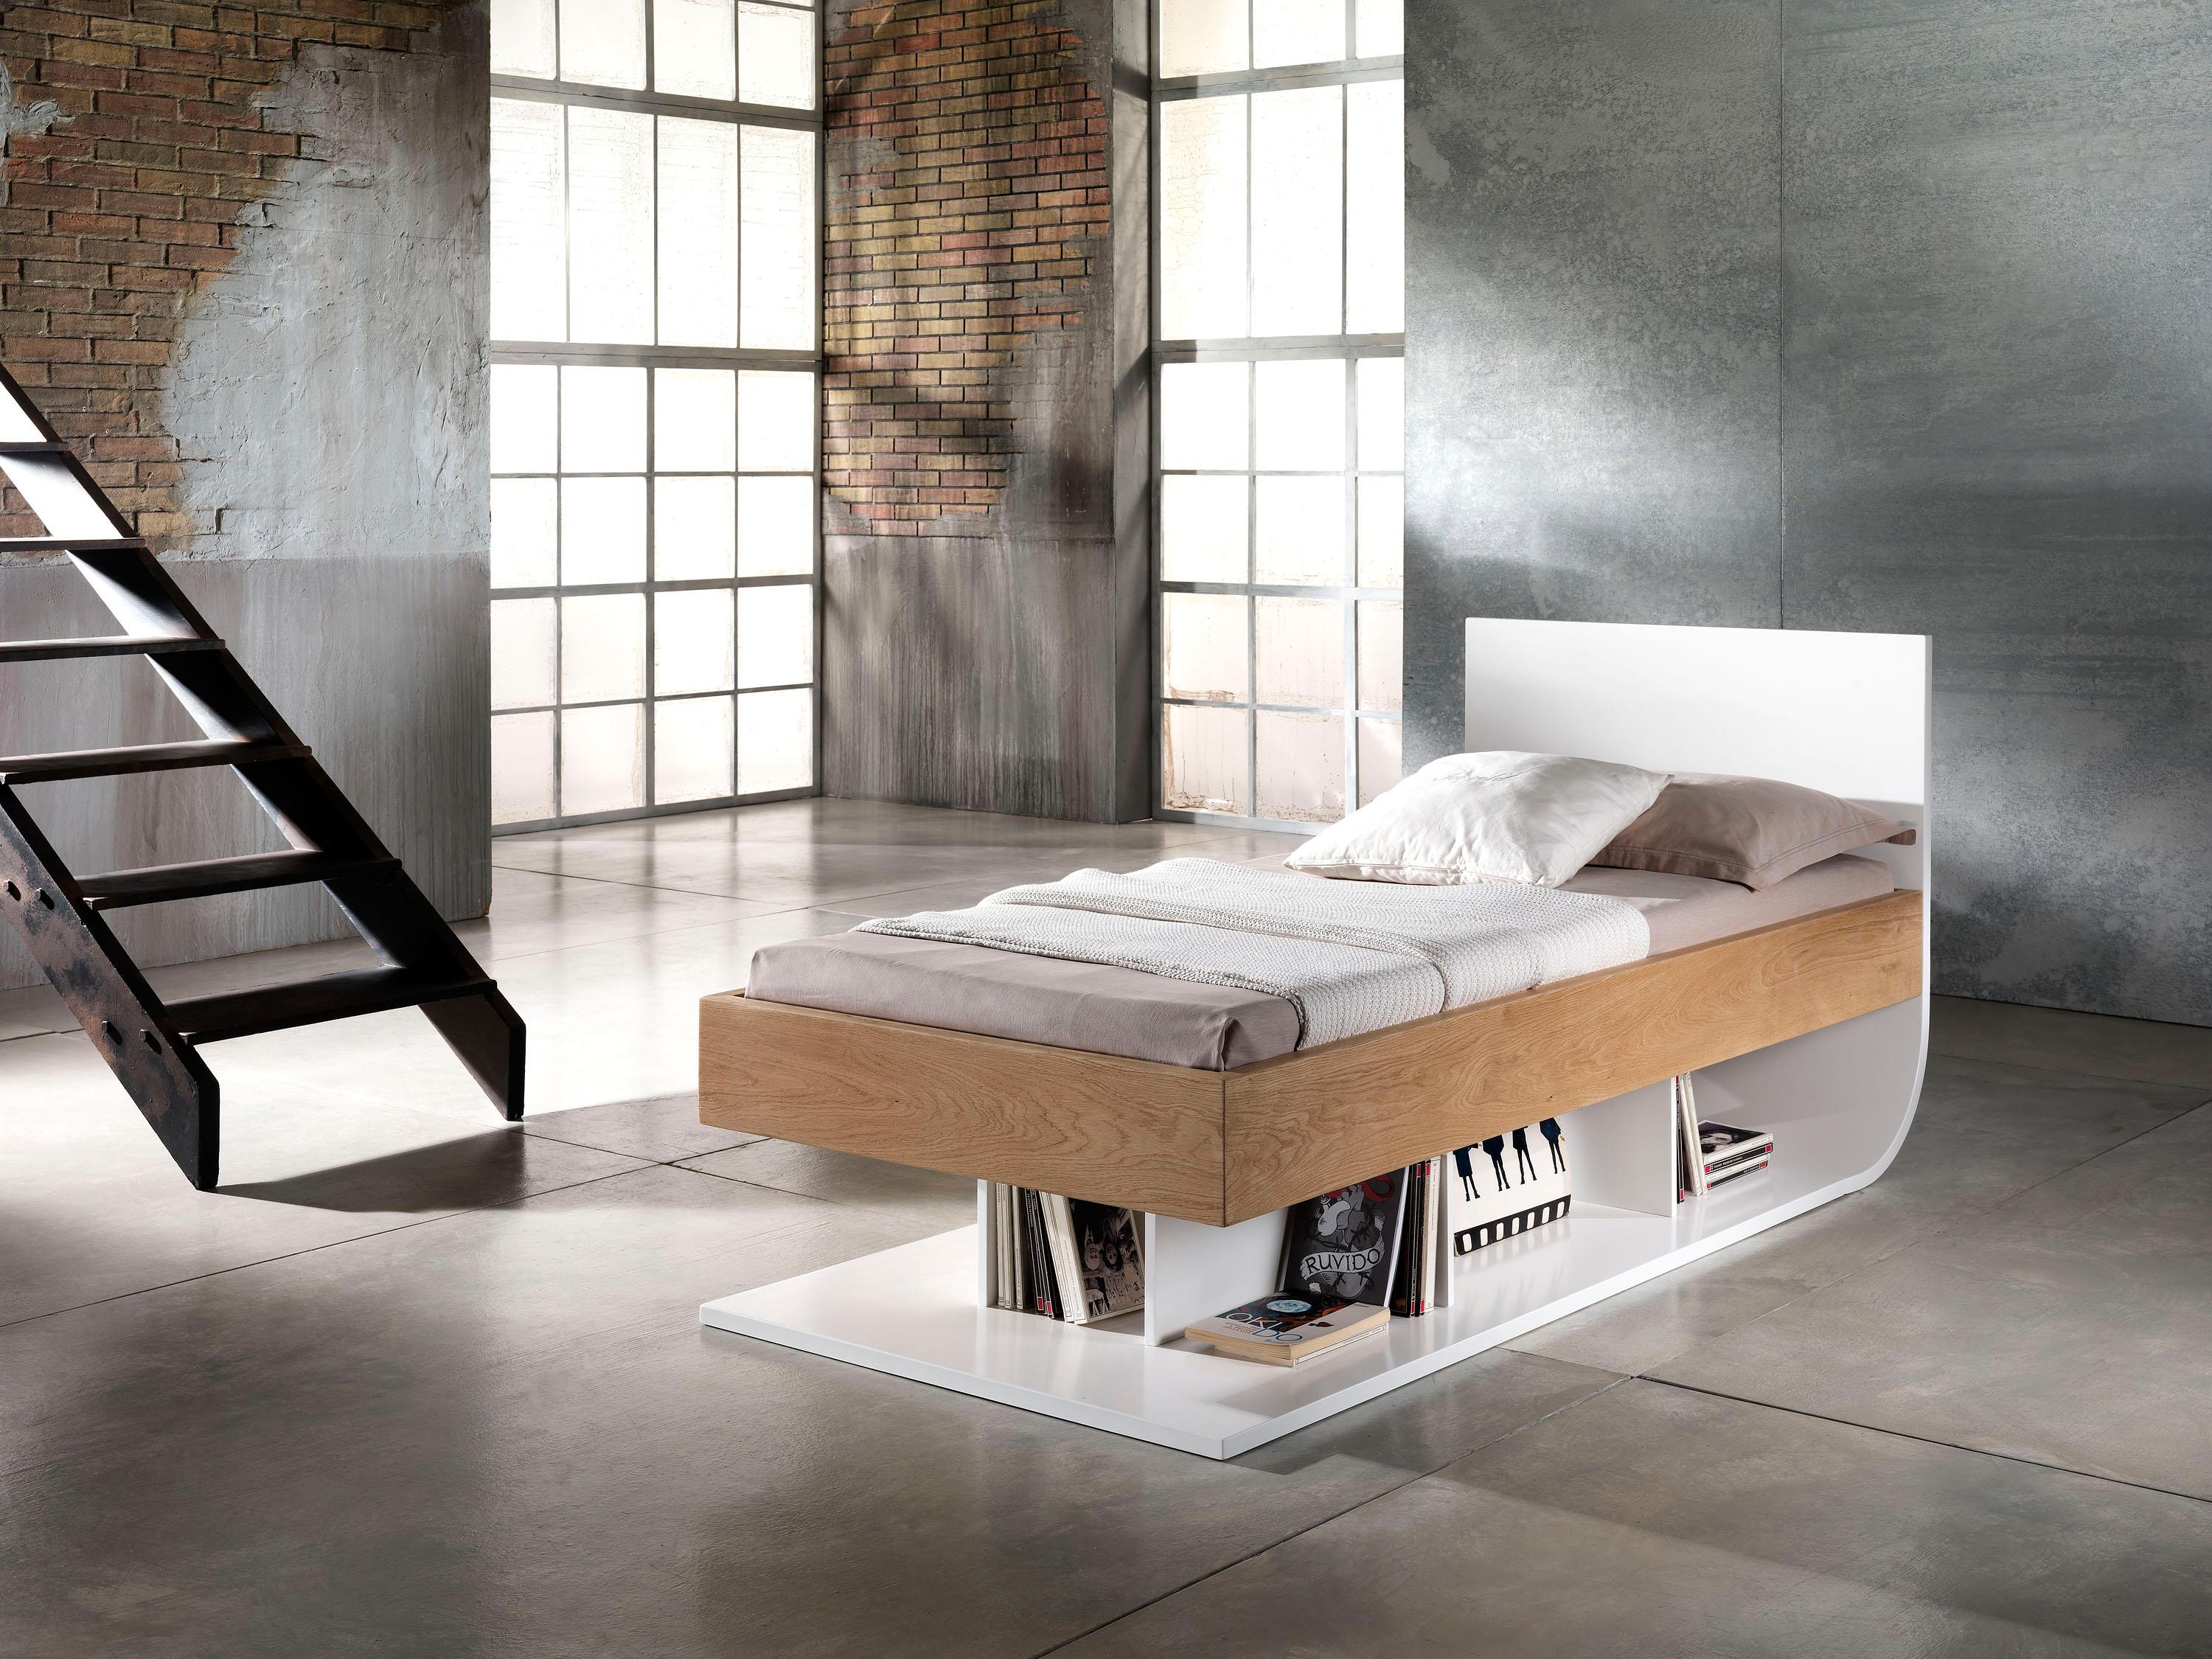 Limbo Bed by Francesco Profili
Dimensions: W 110 x D 210 x H 95 cm 
Materials: Oak, Opaque lacquer MDF.

A clean and pure bed with a strong oak structure and slats, it marries naturally with a soft and delicate curved design, which is finished in